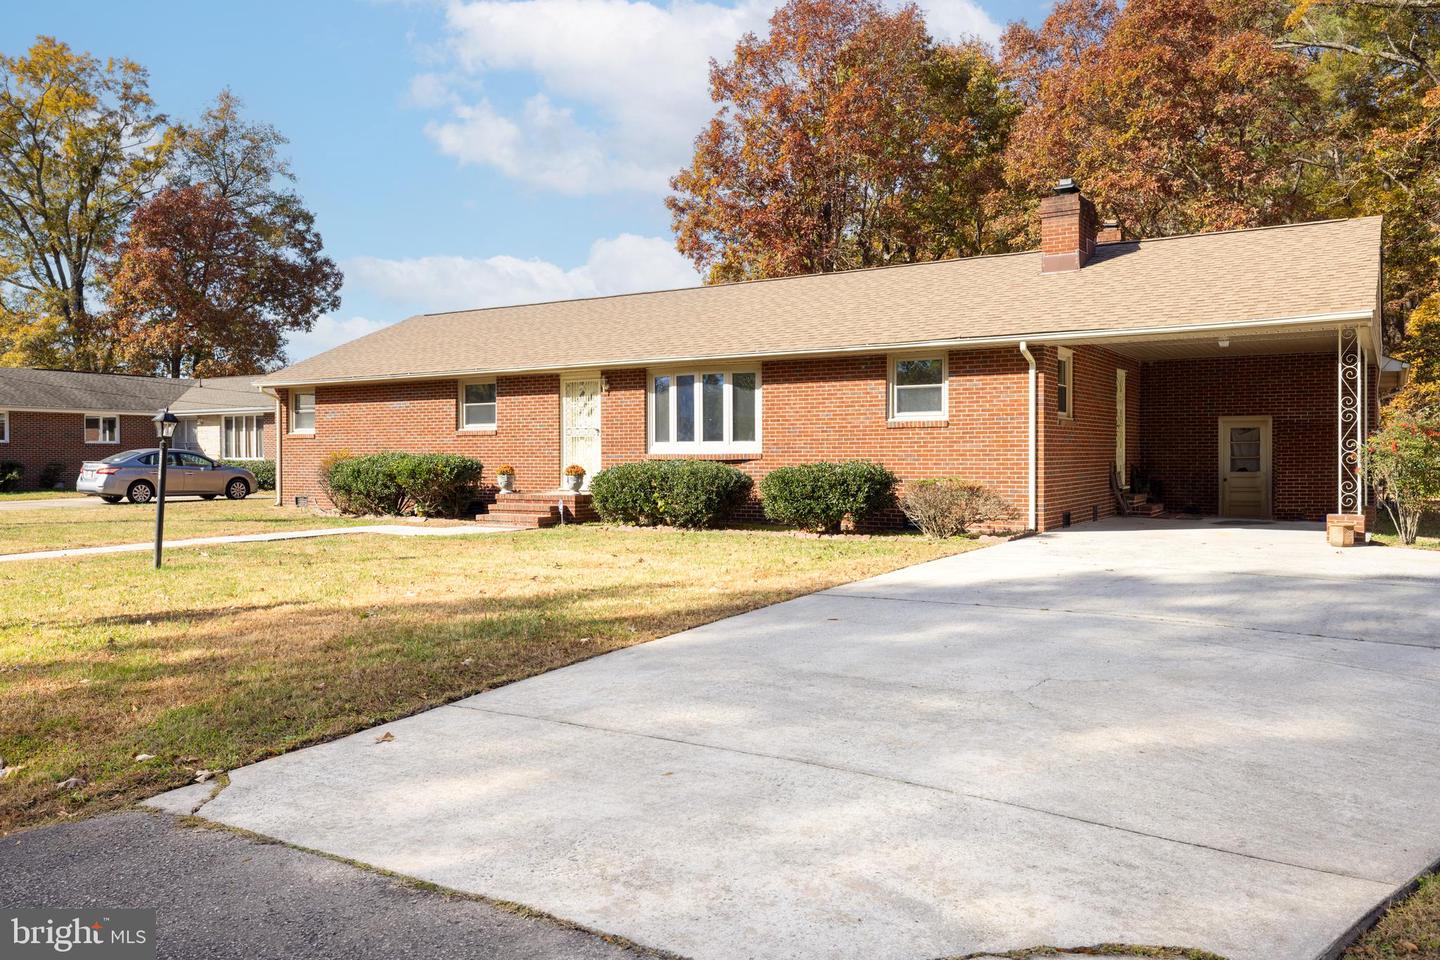 20012 ROOSEVELT AVE, SOUTH CHESTERFIELD, Virginia 23803, 3 Bedrooms Bedrooms, ,2 BathroomsBathrooms,Residential,For sale,20012 ROOSEVELT AVE,VACF2000710 MLS # VACF2000710